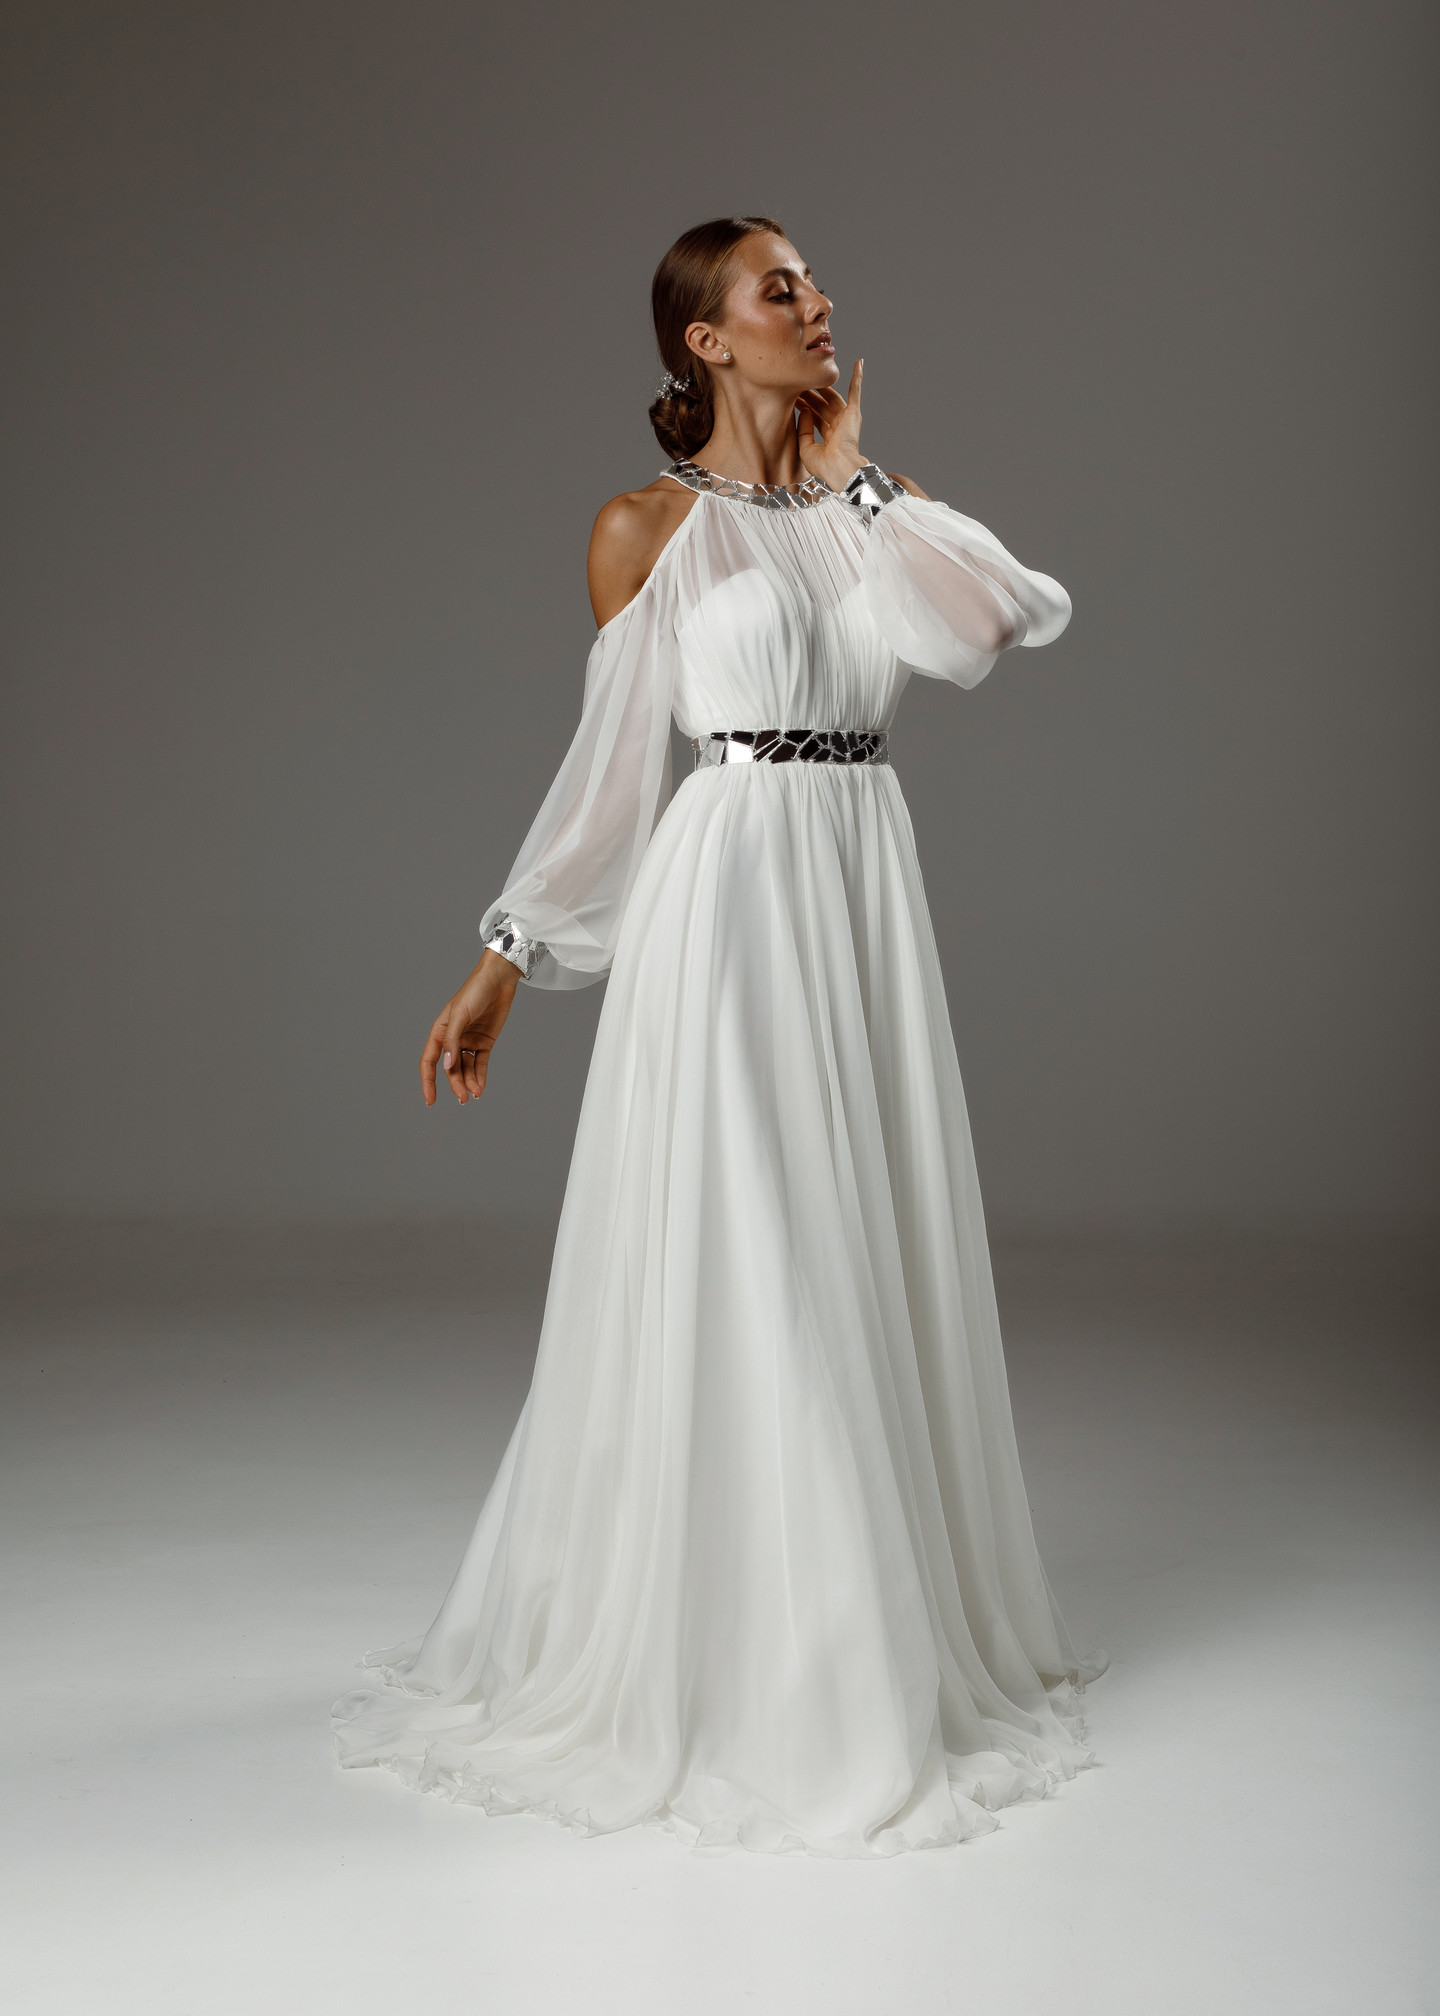 Ariana gown, 2020, couture, dress, bridal, off-white, chiffon, embroidery, A-line, sleeves